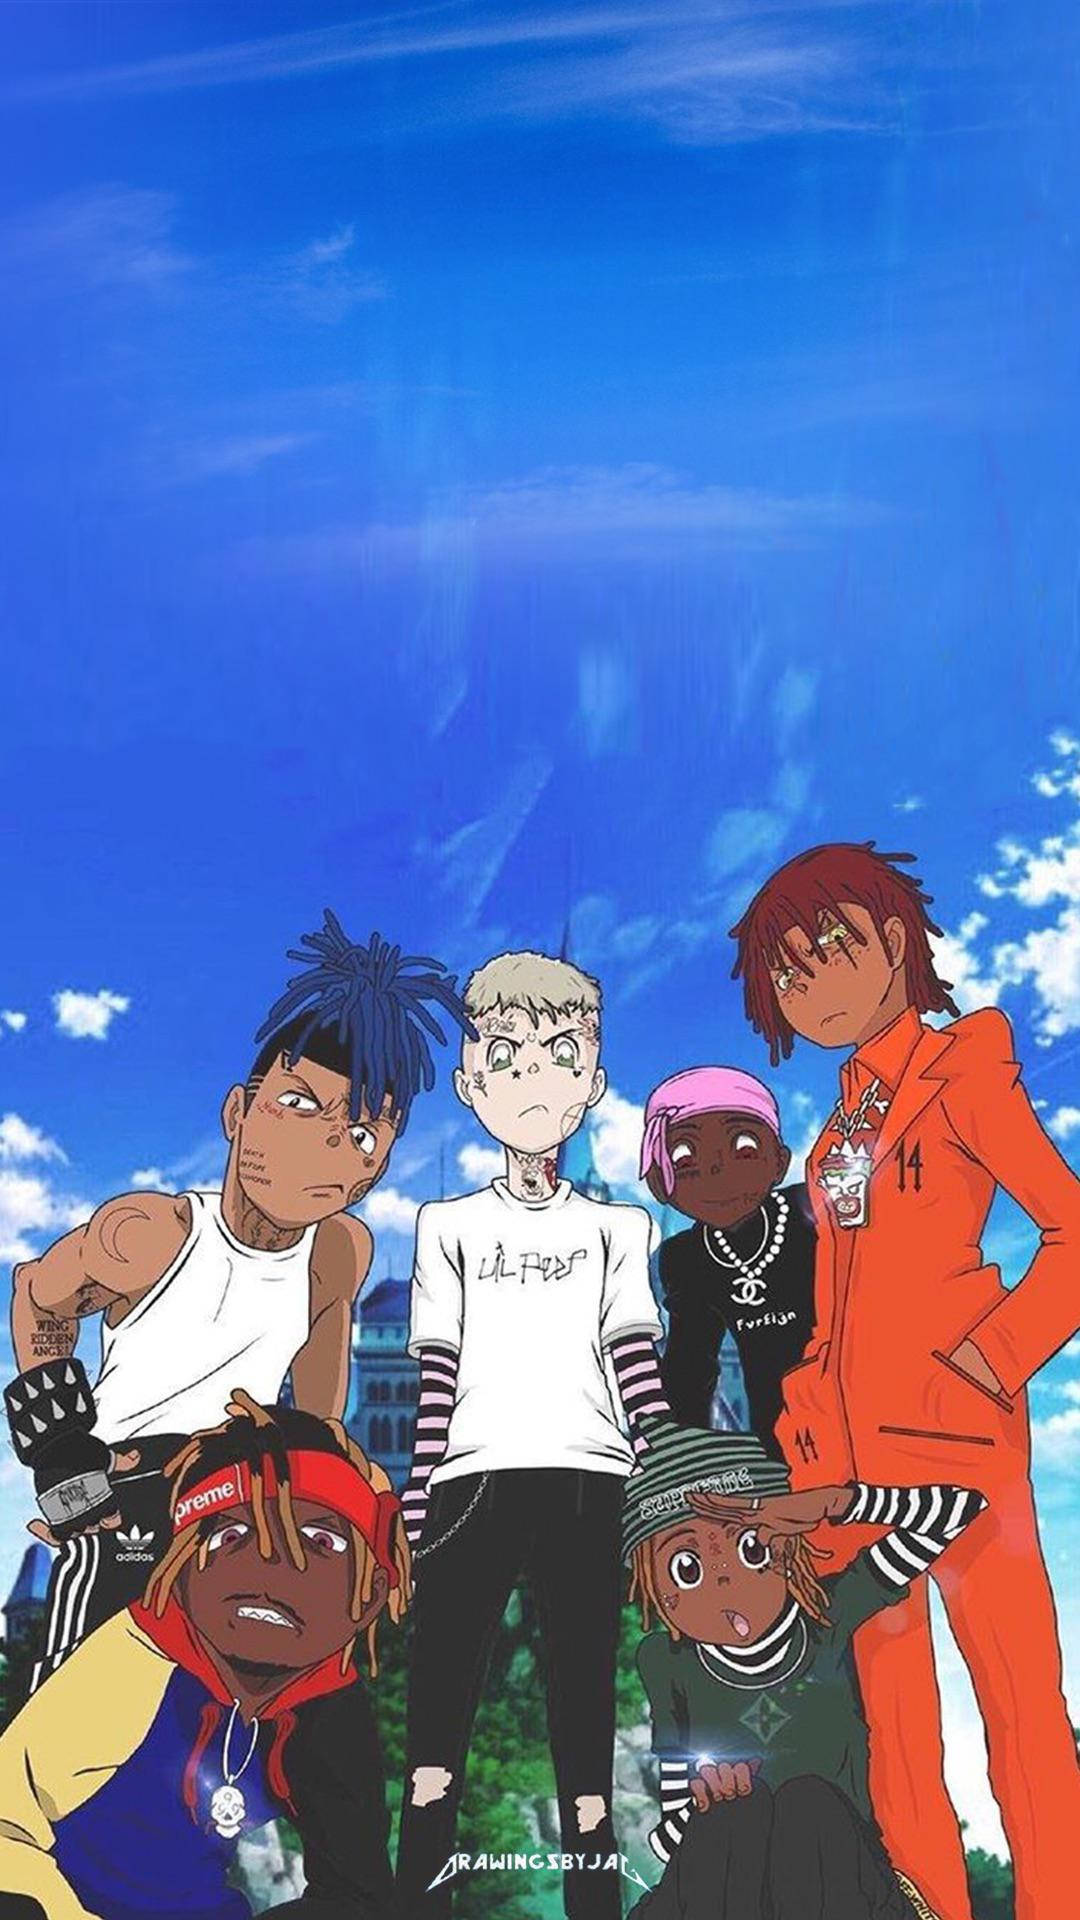 Animated Juice Wrld With Friends